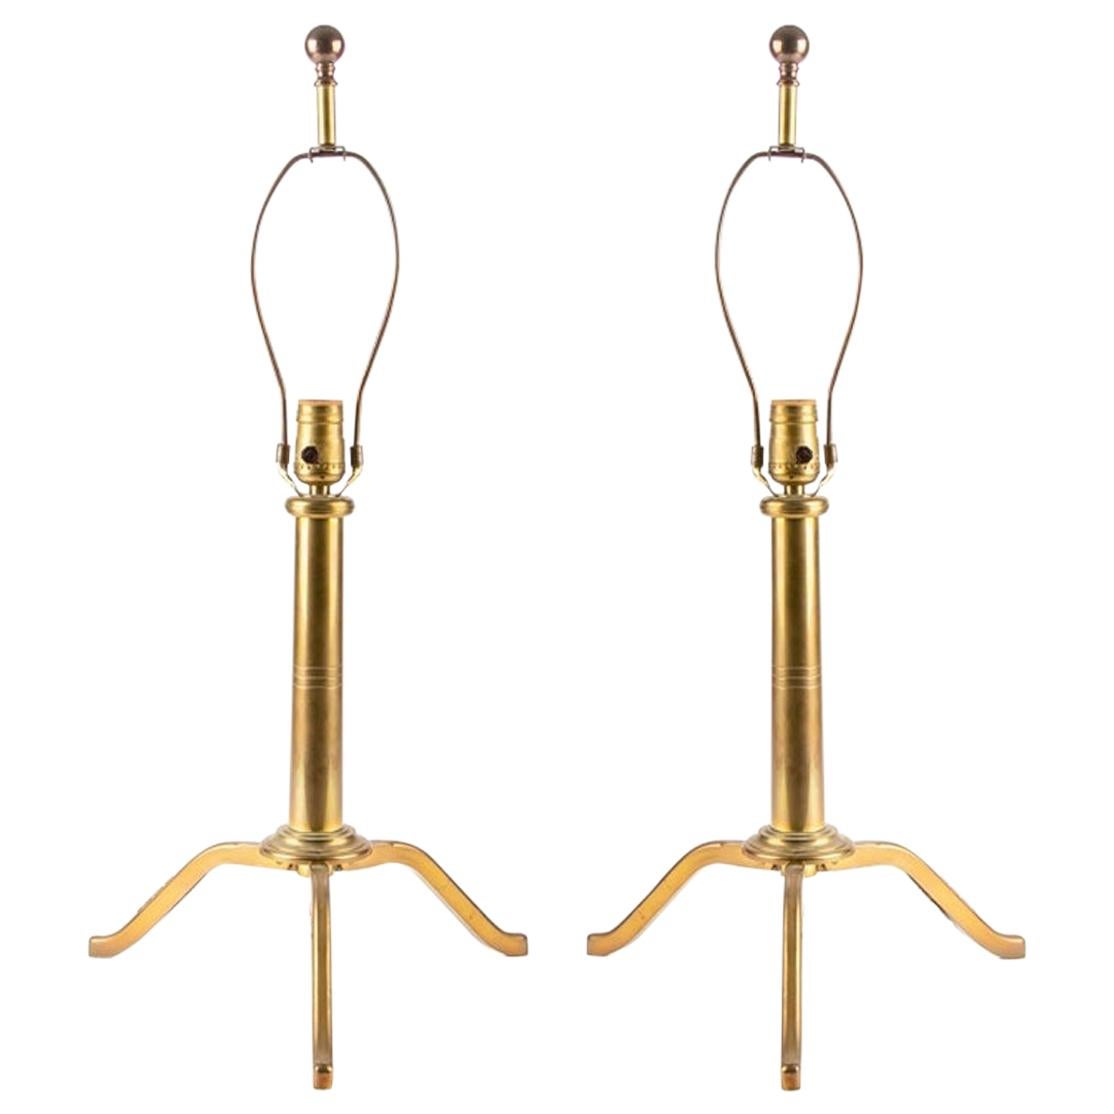 Pair of Nautical Brass Collapsible Tripod Stands Re-Configured as Lamps